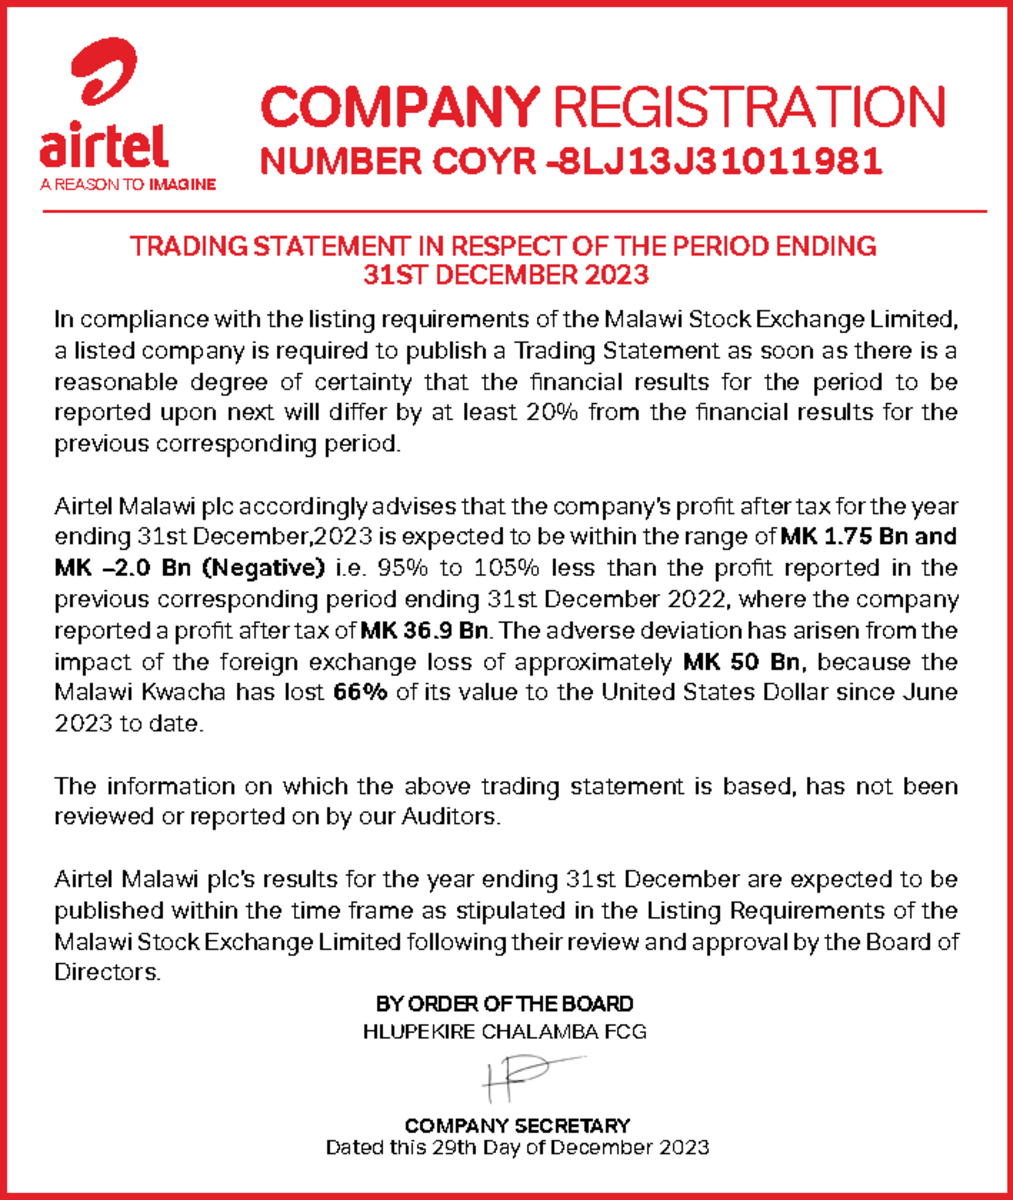 Official statement from Airtel, one of Malawi’s largest companies, about losses related to the collapse of the kwacha